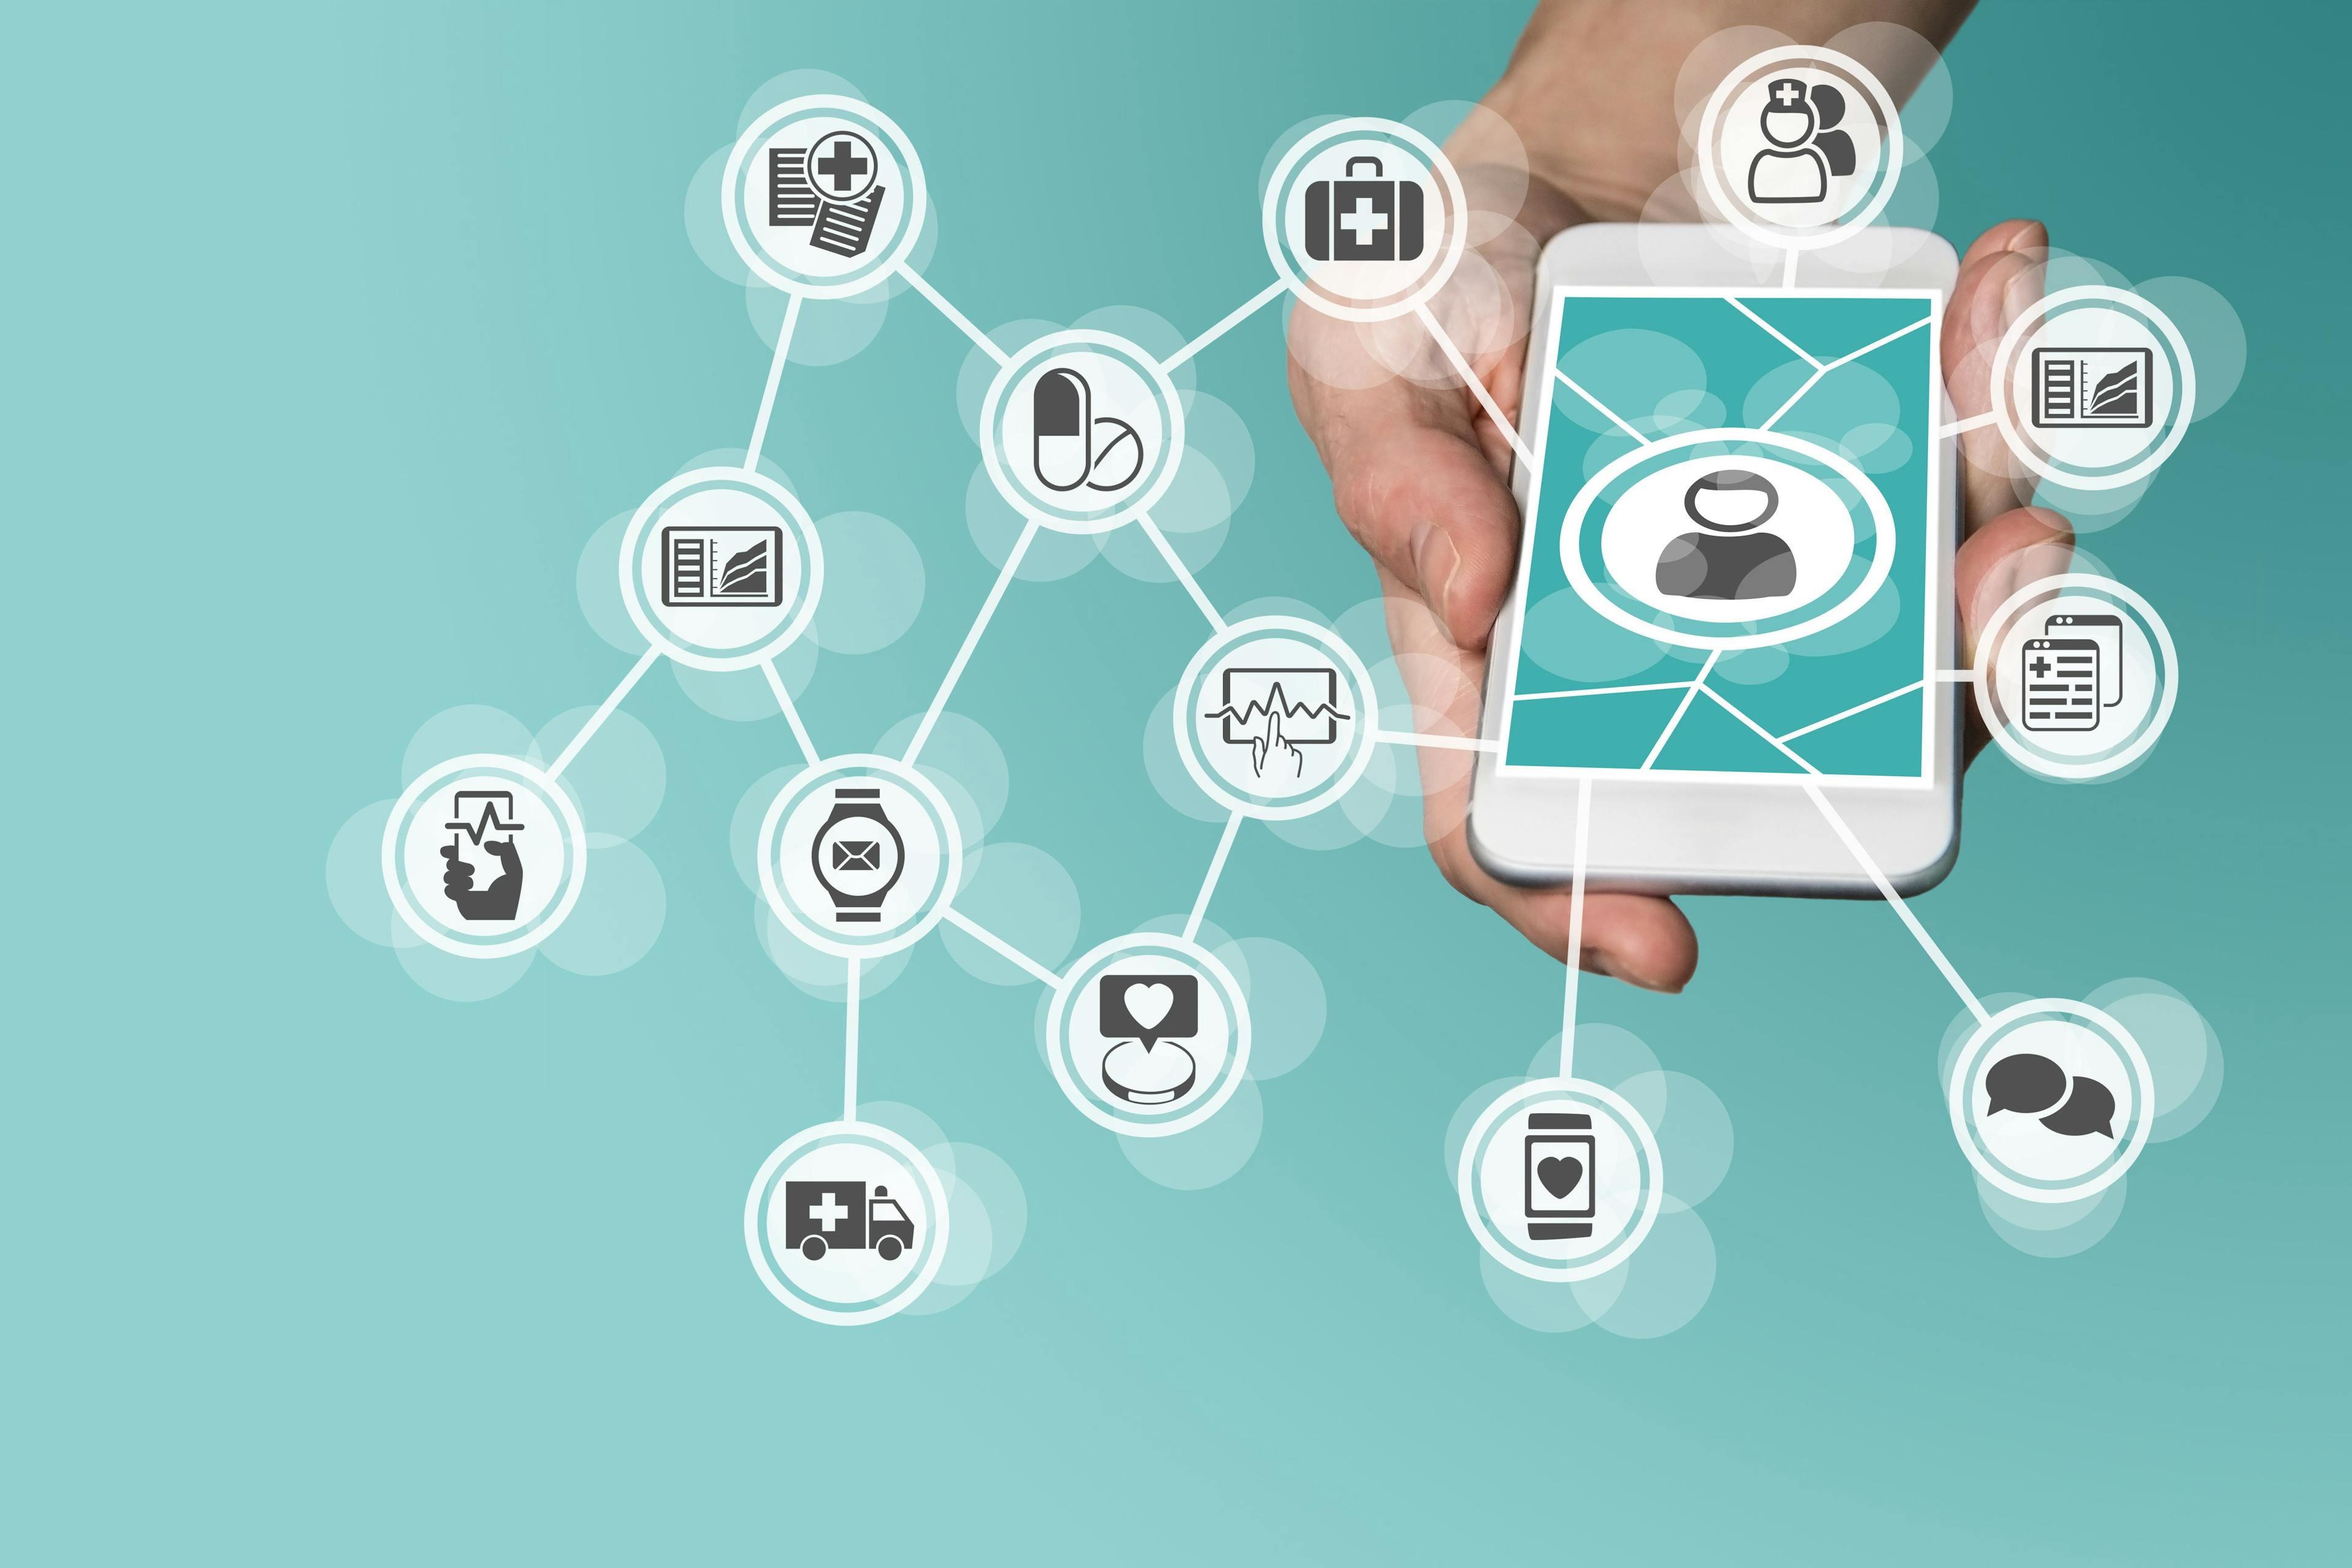 Digital Health Leaders Propose Guidelines to Rigorously, But Rapidly Evaluate Their Products